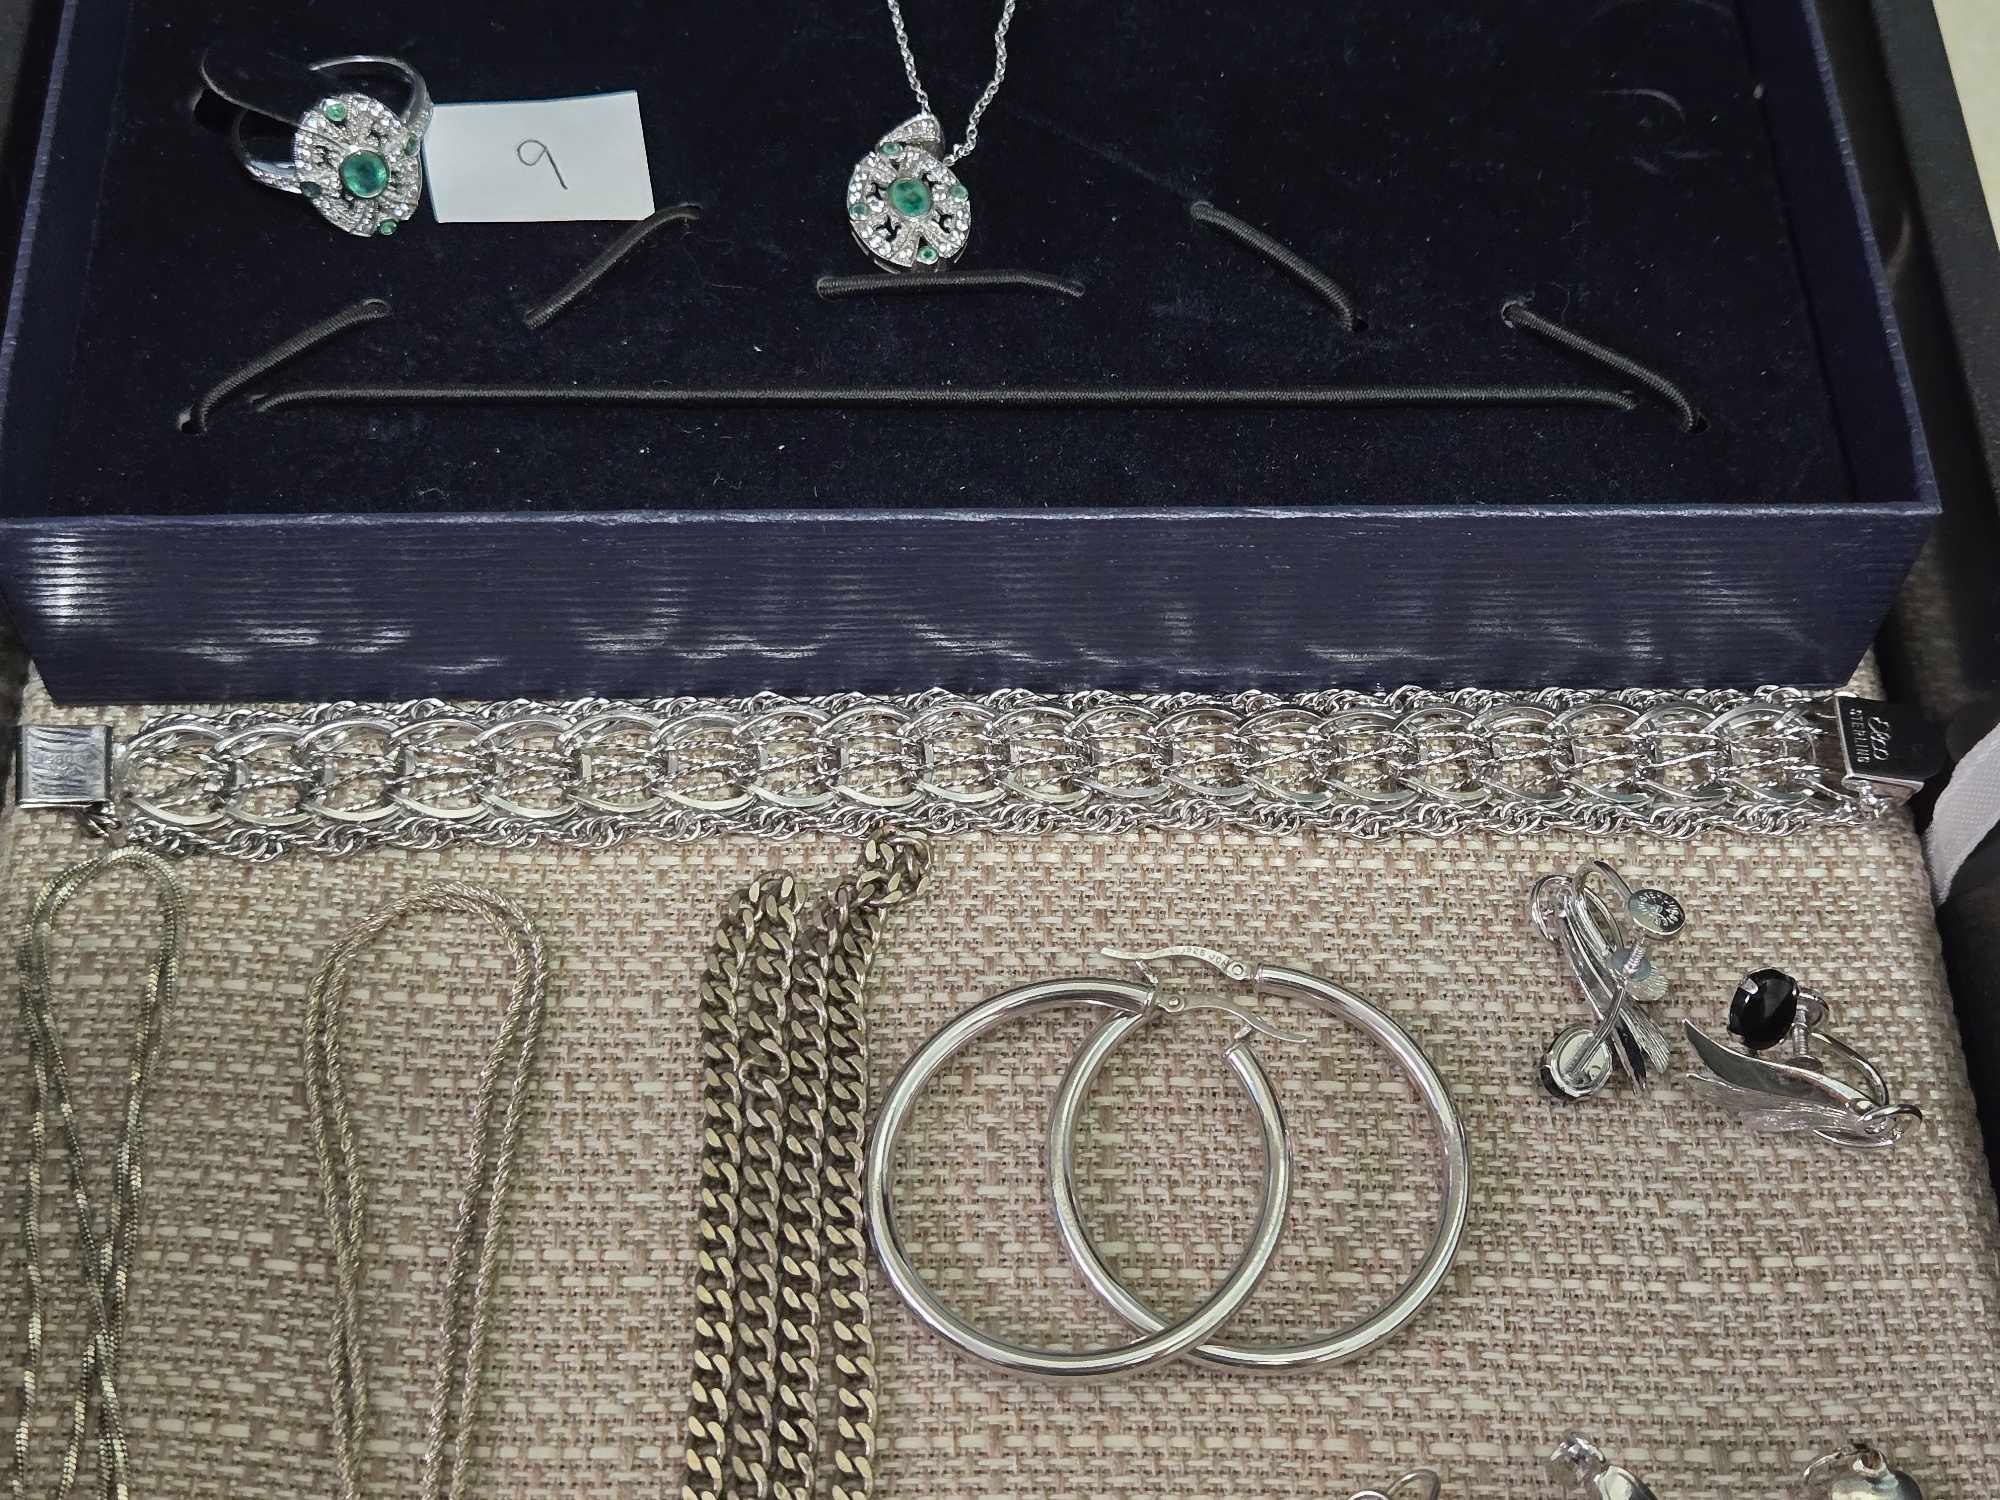 Sterling Silver Jewelry Incl. Stauer 4 Pc. Set